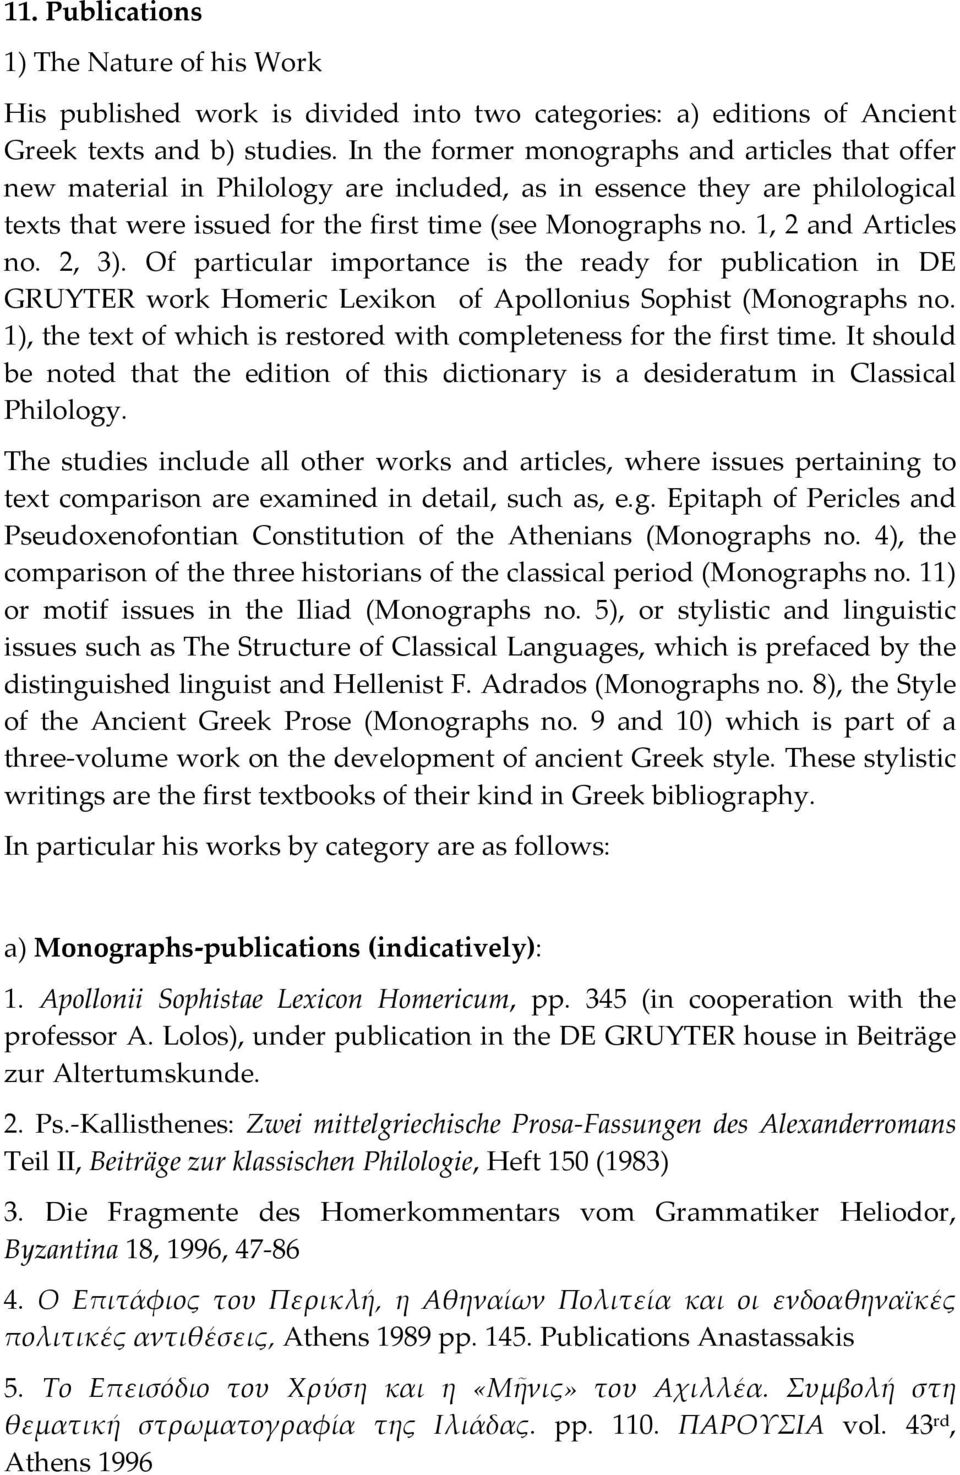 1, 2 and Articles no. 2, 3). Of particular importance is the ready for publication in DE GRUYTER work Homeric Lexikon of Apollonius Sophist (Monographs no.